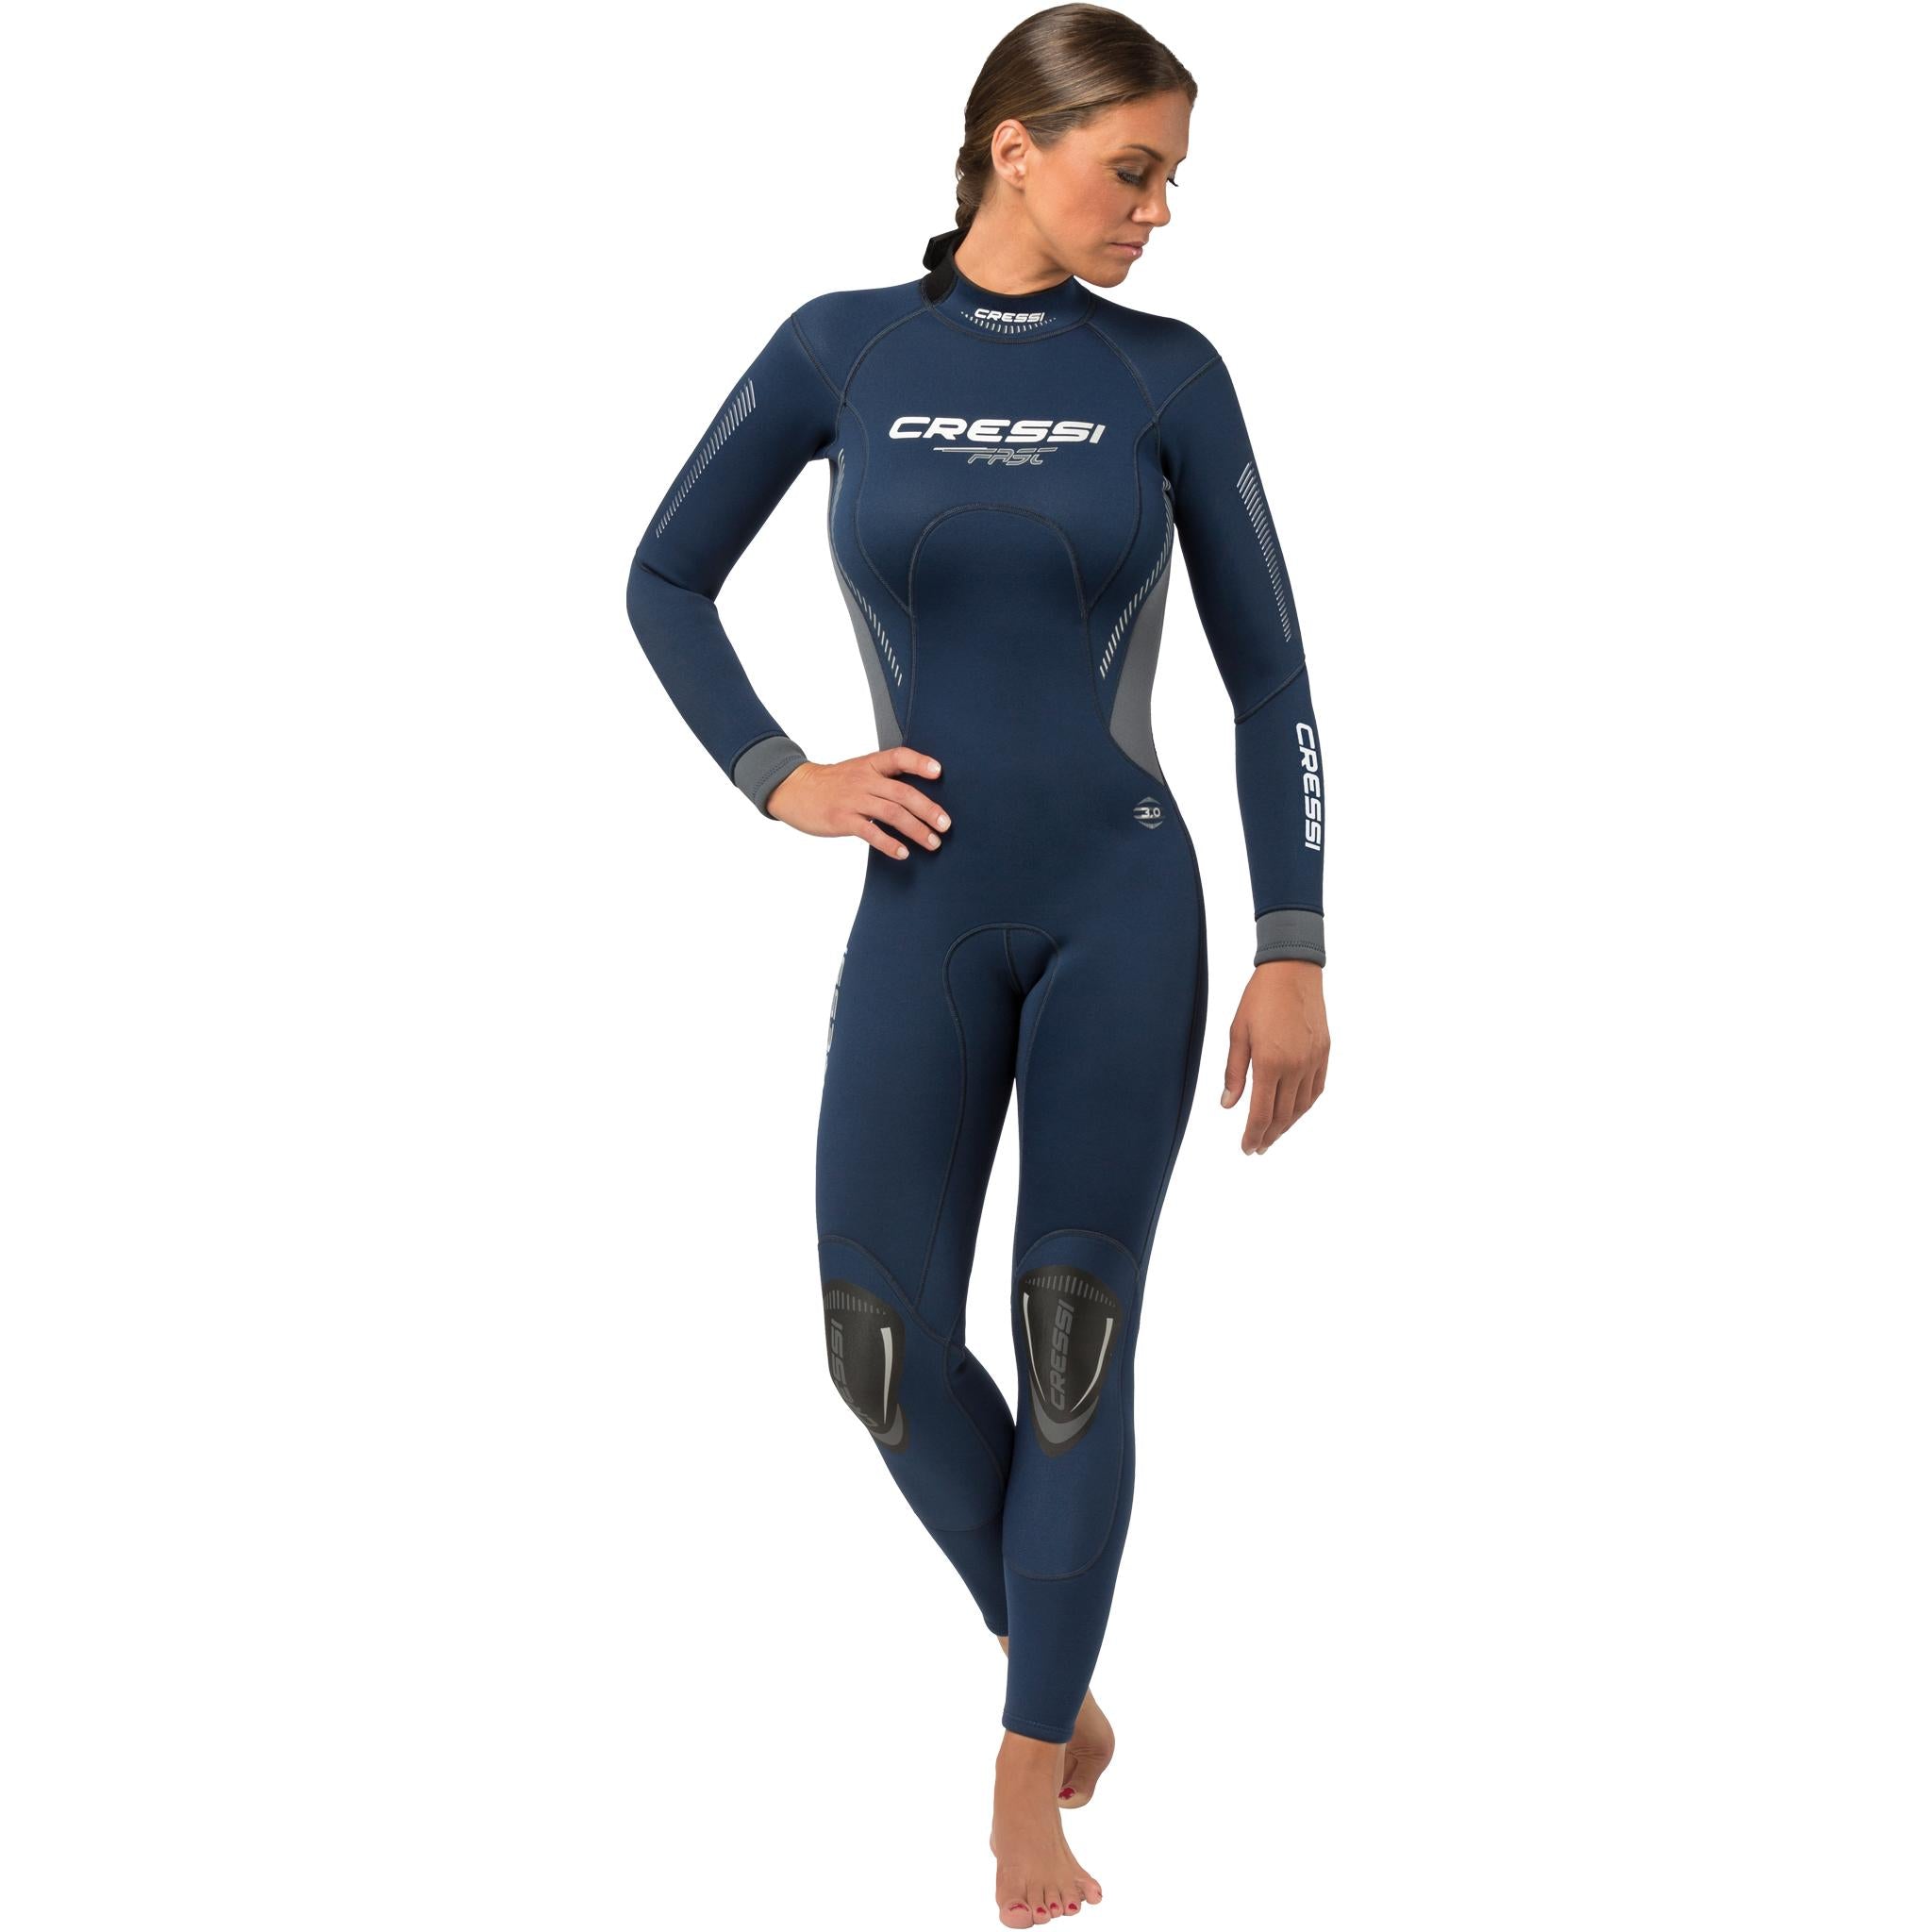 Cressi Fast Lady 3mm Wetsuit